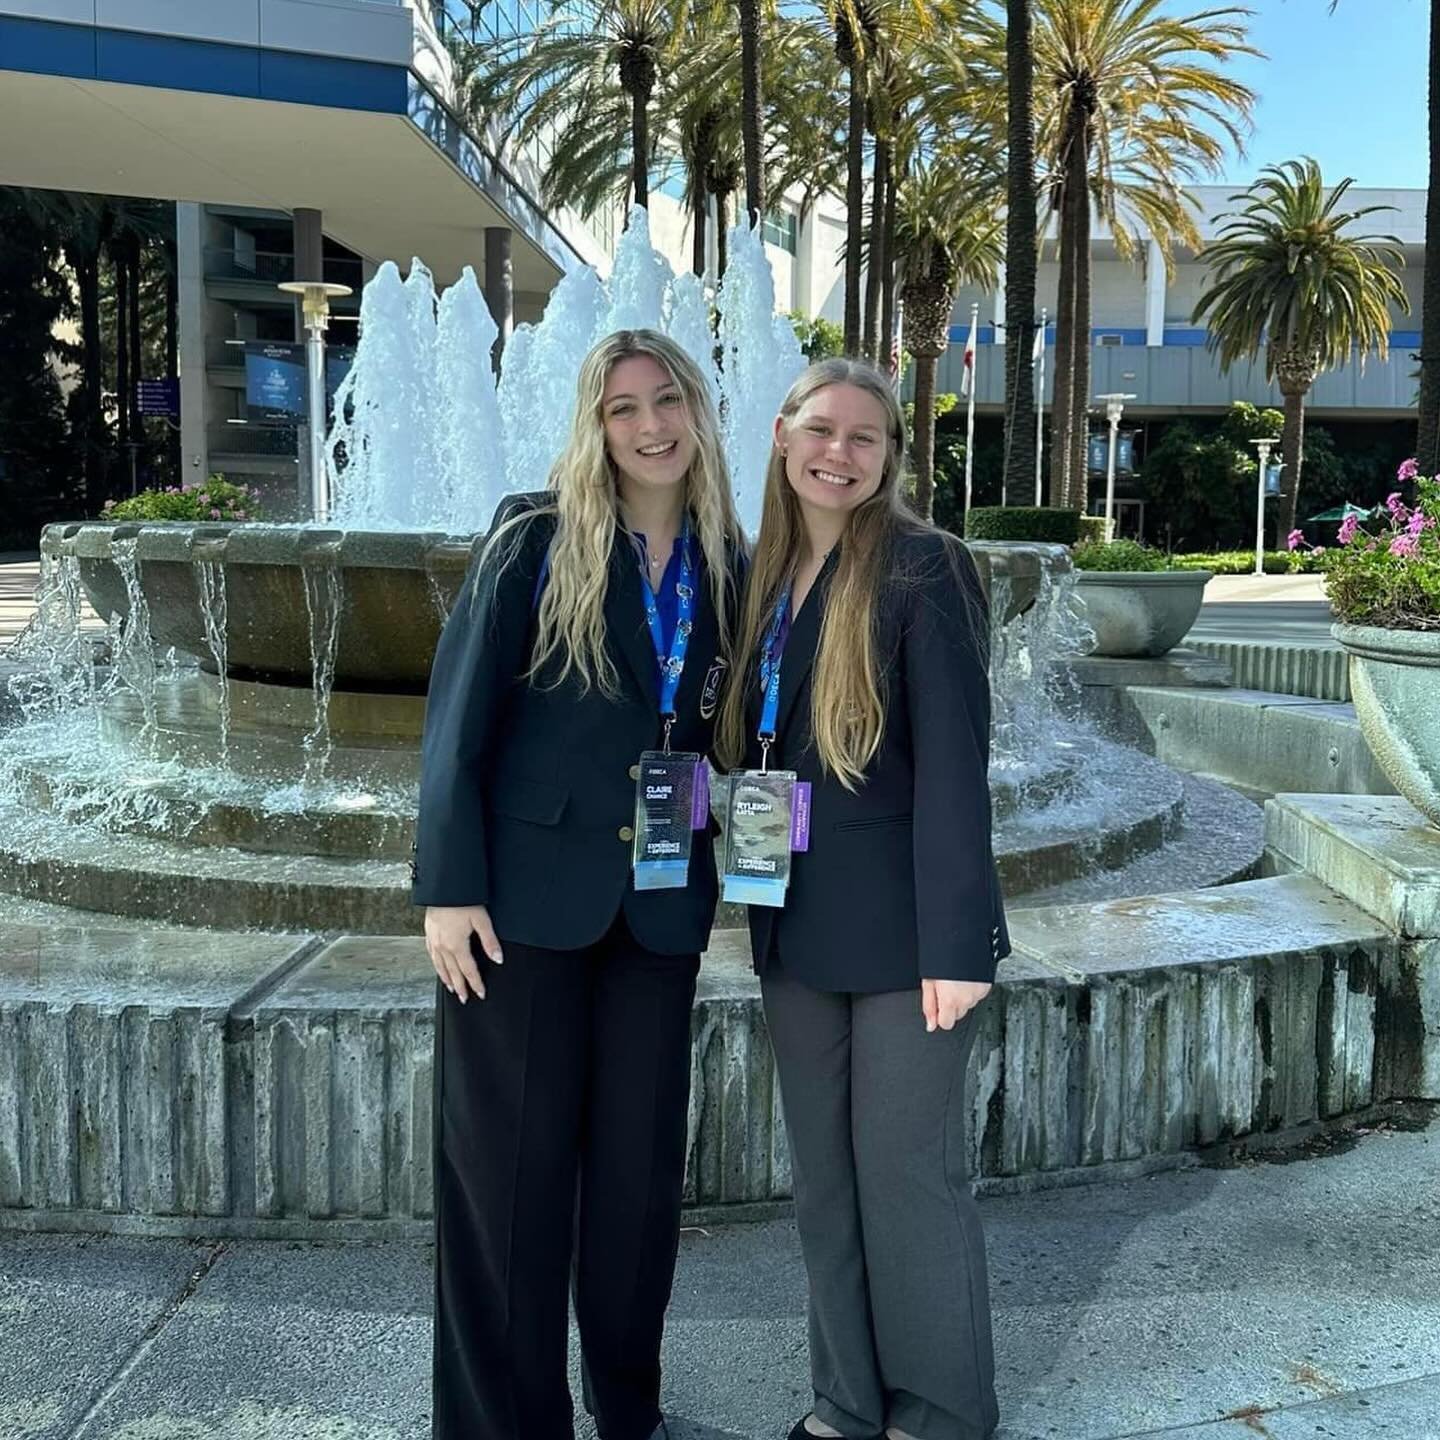 Check out all of the fun Claire Chance, Ryleigh Latta, and Mrs. McDowell had on their trip to Anaheim, California this week for the DECA International Career Development Conference! 

We are so proud of Claire and Ryleigh for receiving Competency in 